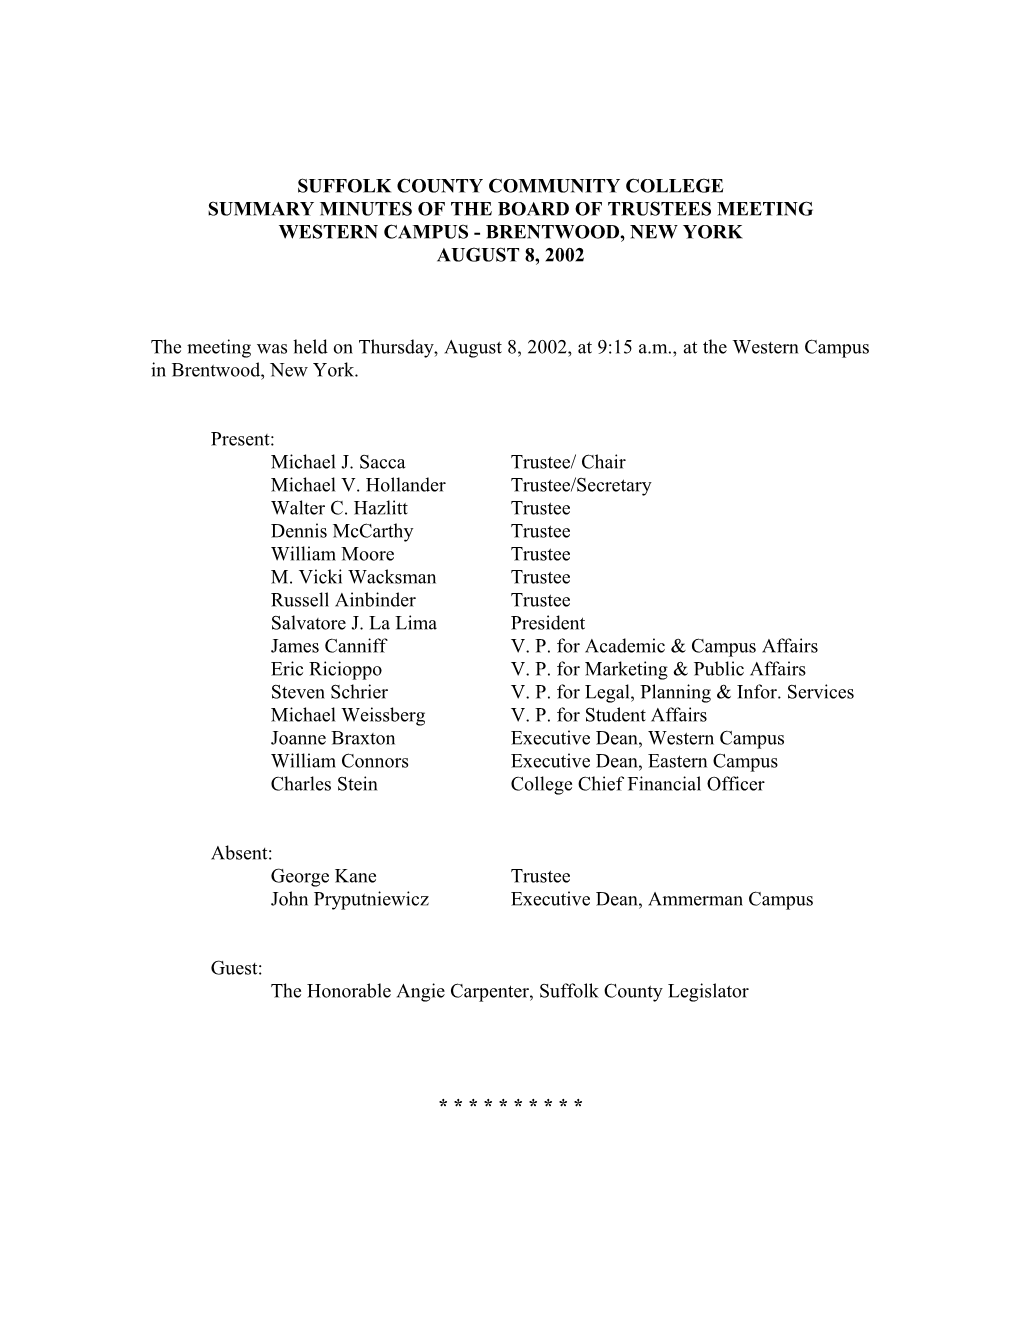 Summary Minutes of the Board of Trustees Meeting